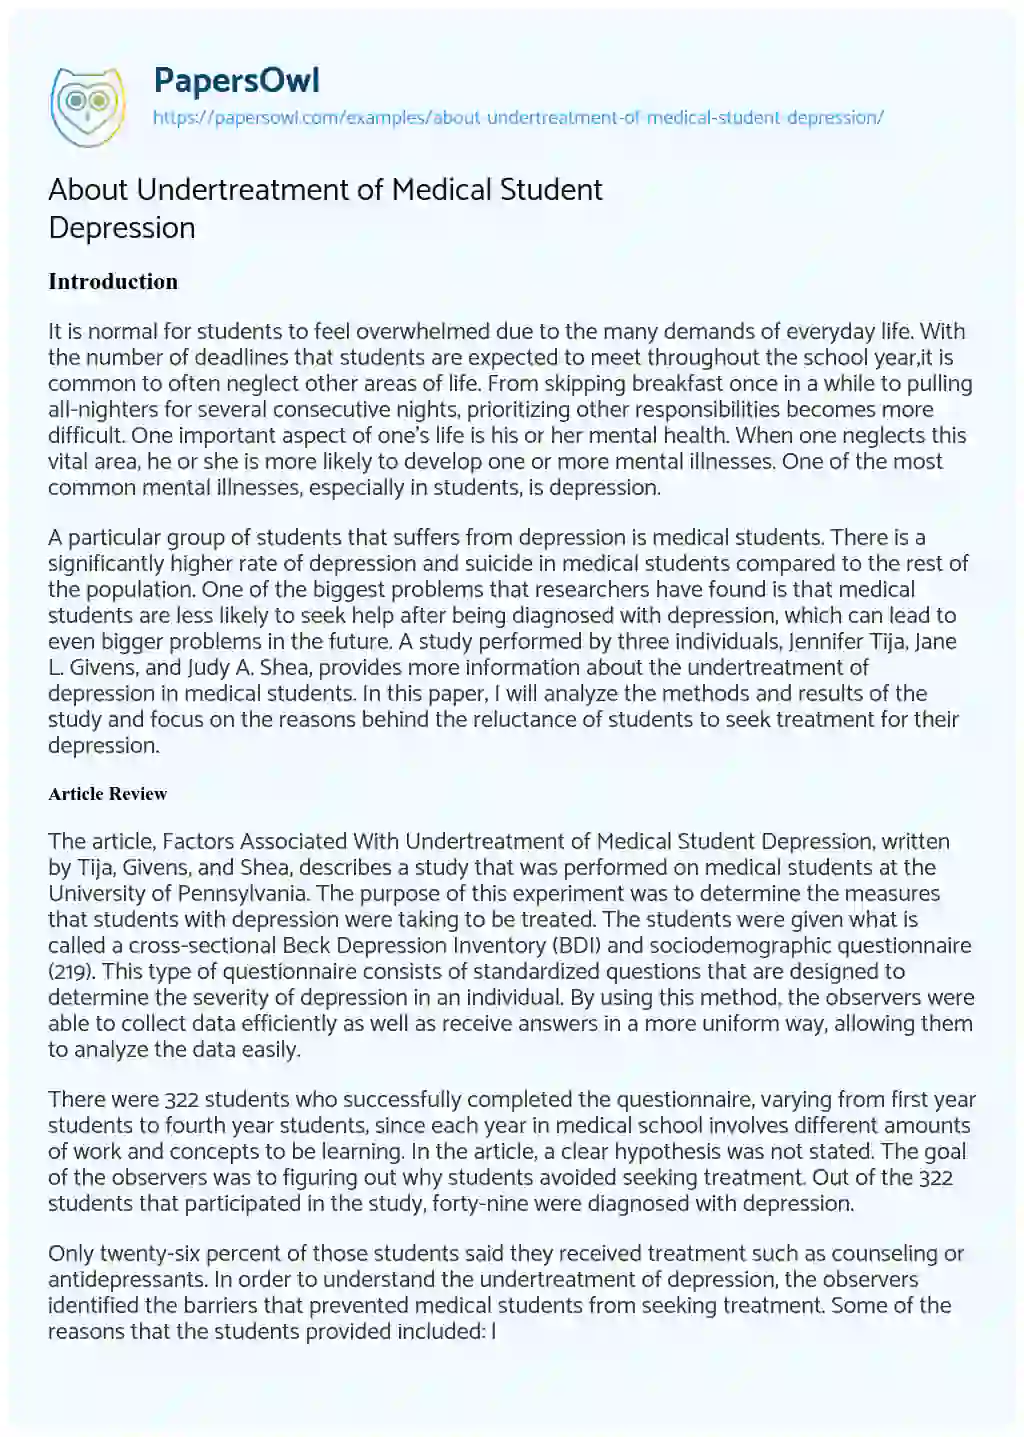 Essay on About Undertreatment of Medical Student Depression